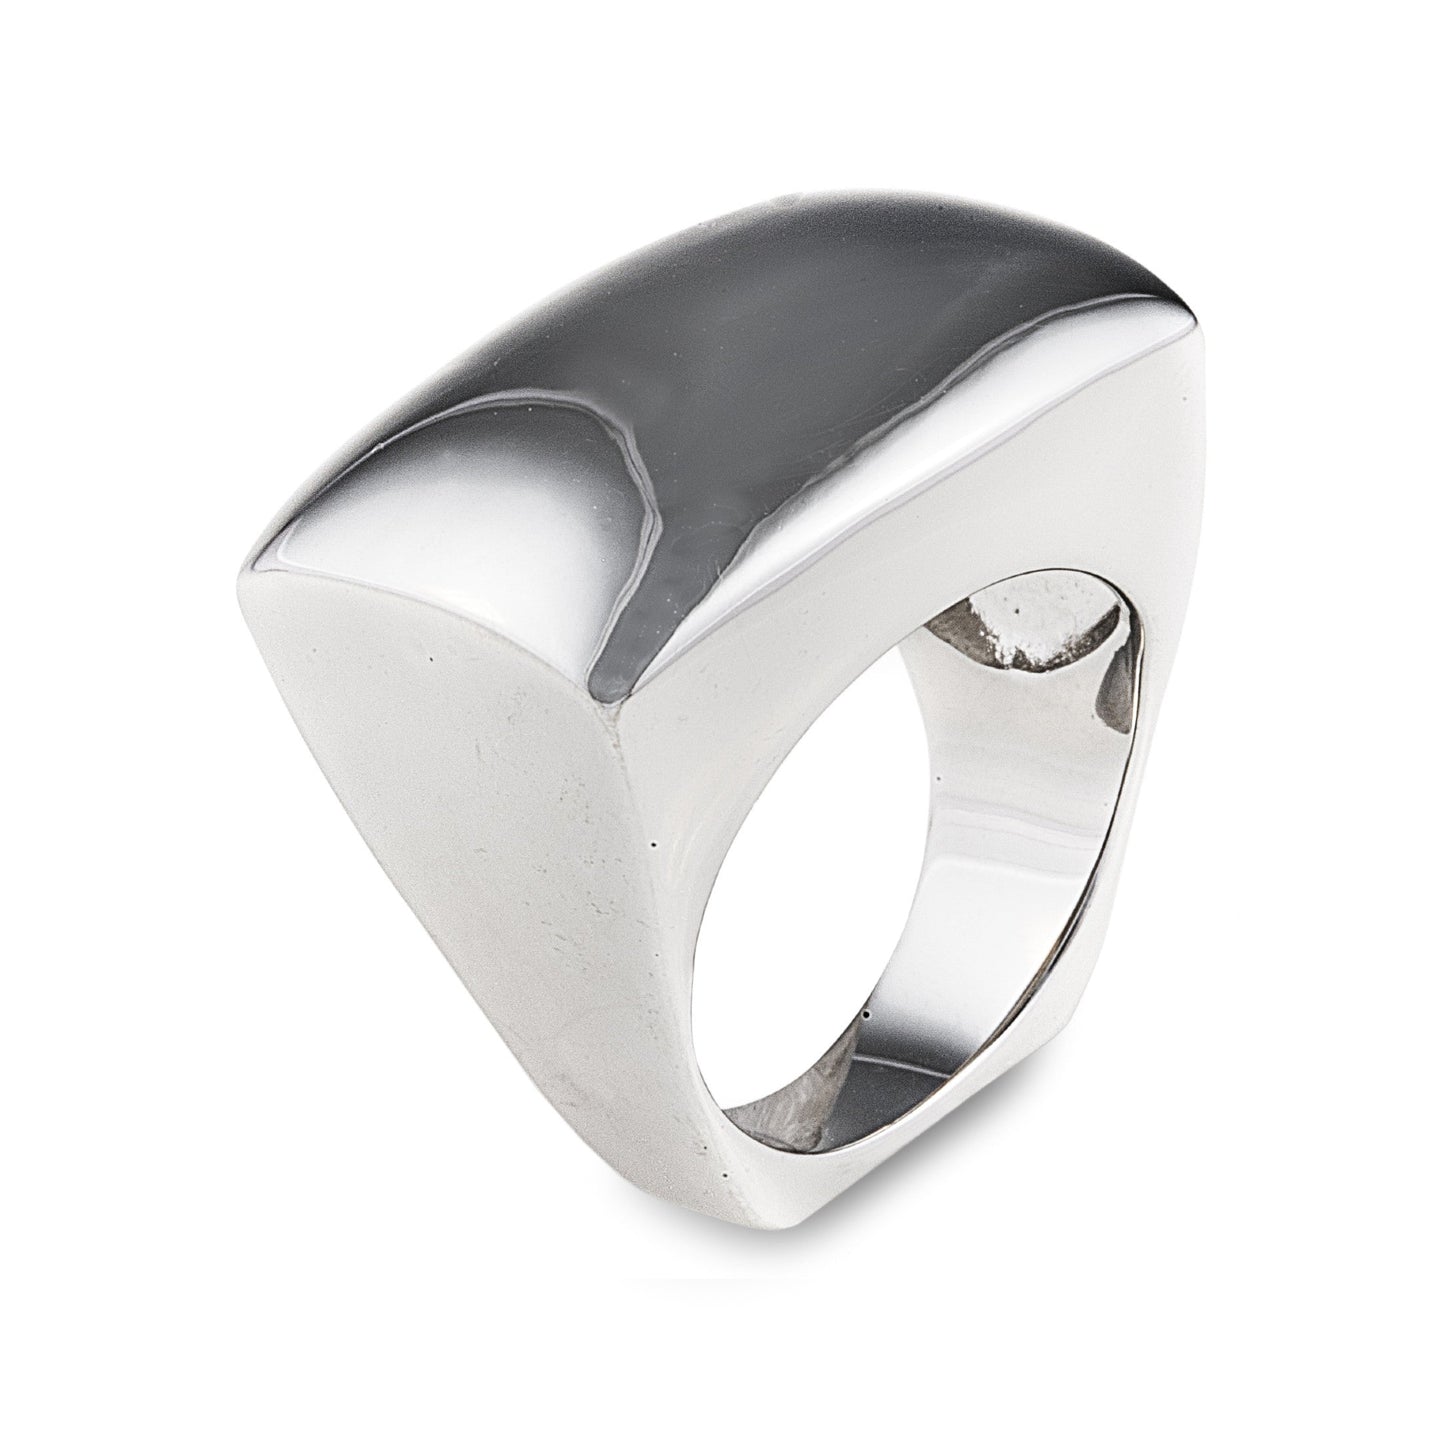 Allure Ring made of 925 sterling silver featuring a rectangular design that is both modern and comfortable to wear. Shop rings & affordable luxury jewellery by Bellagio & Co. Worldwide shipping